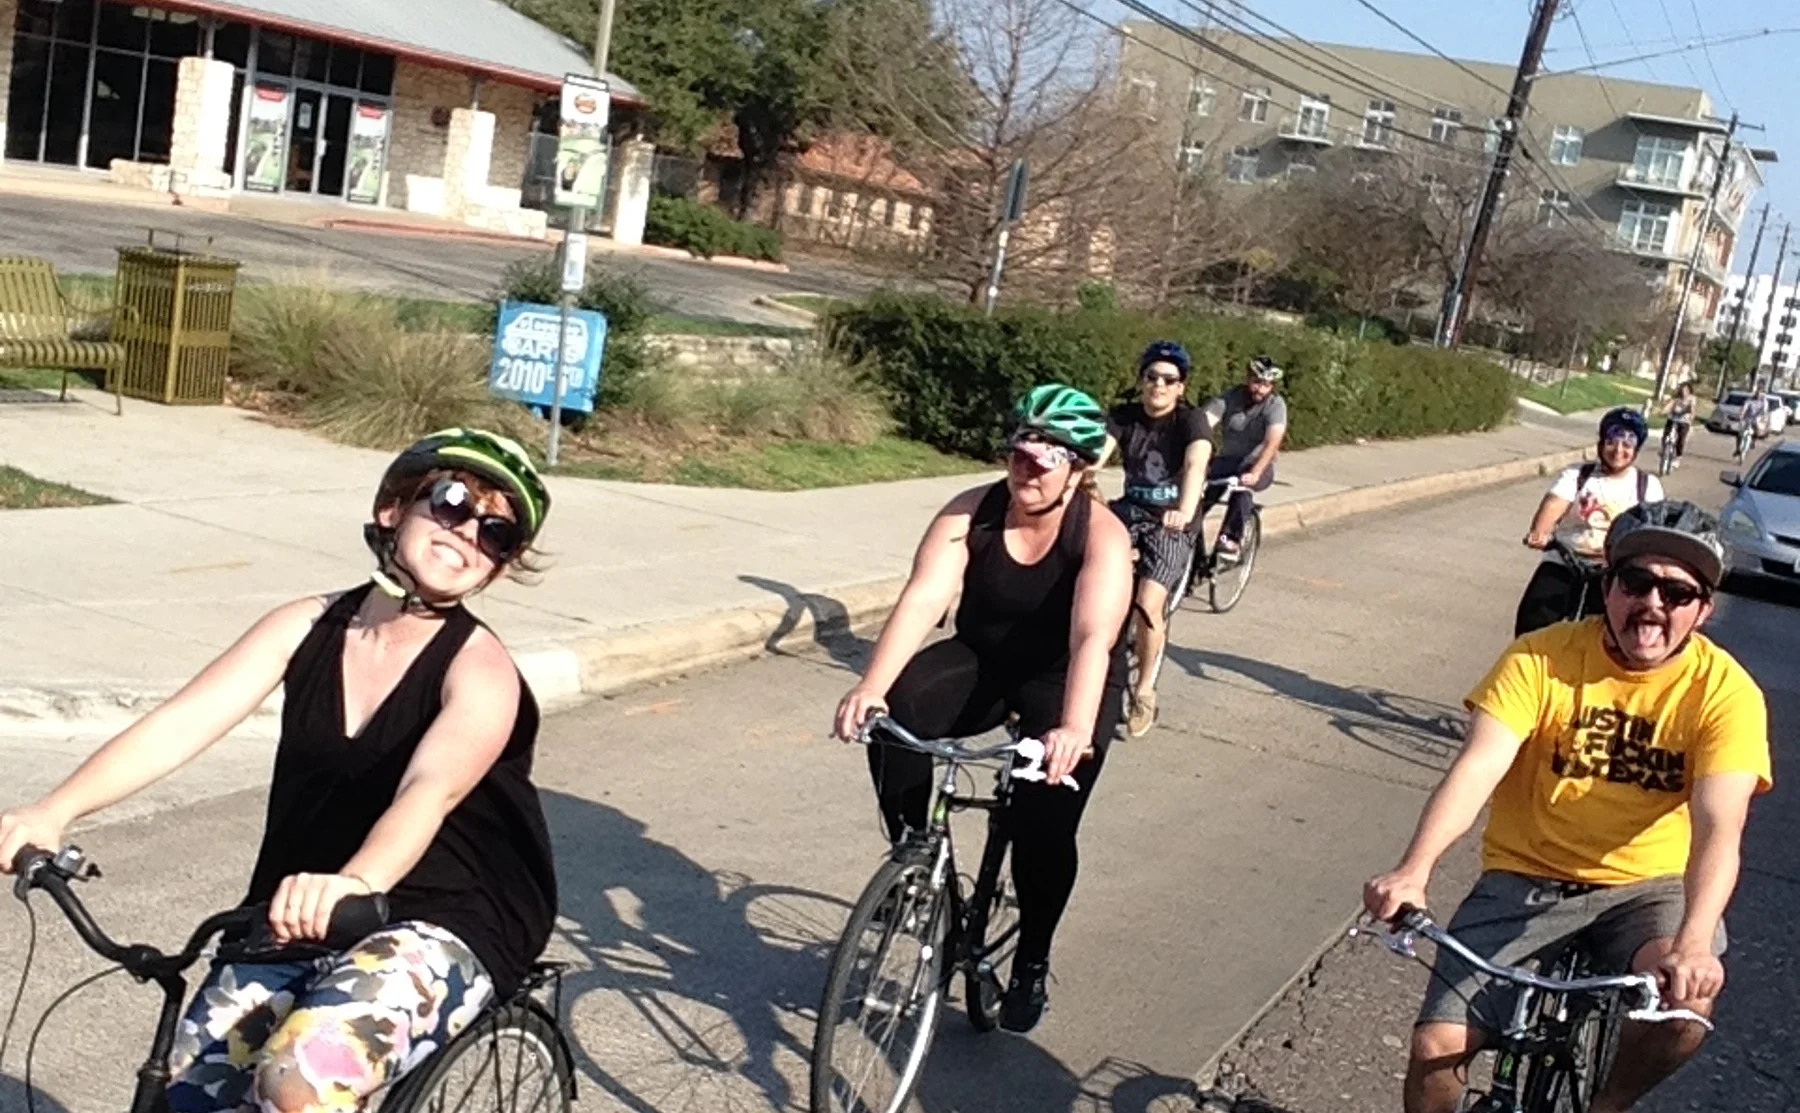 Austin Beer and City Sites by Bike Tour - 1271337